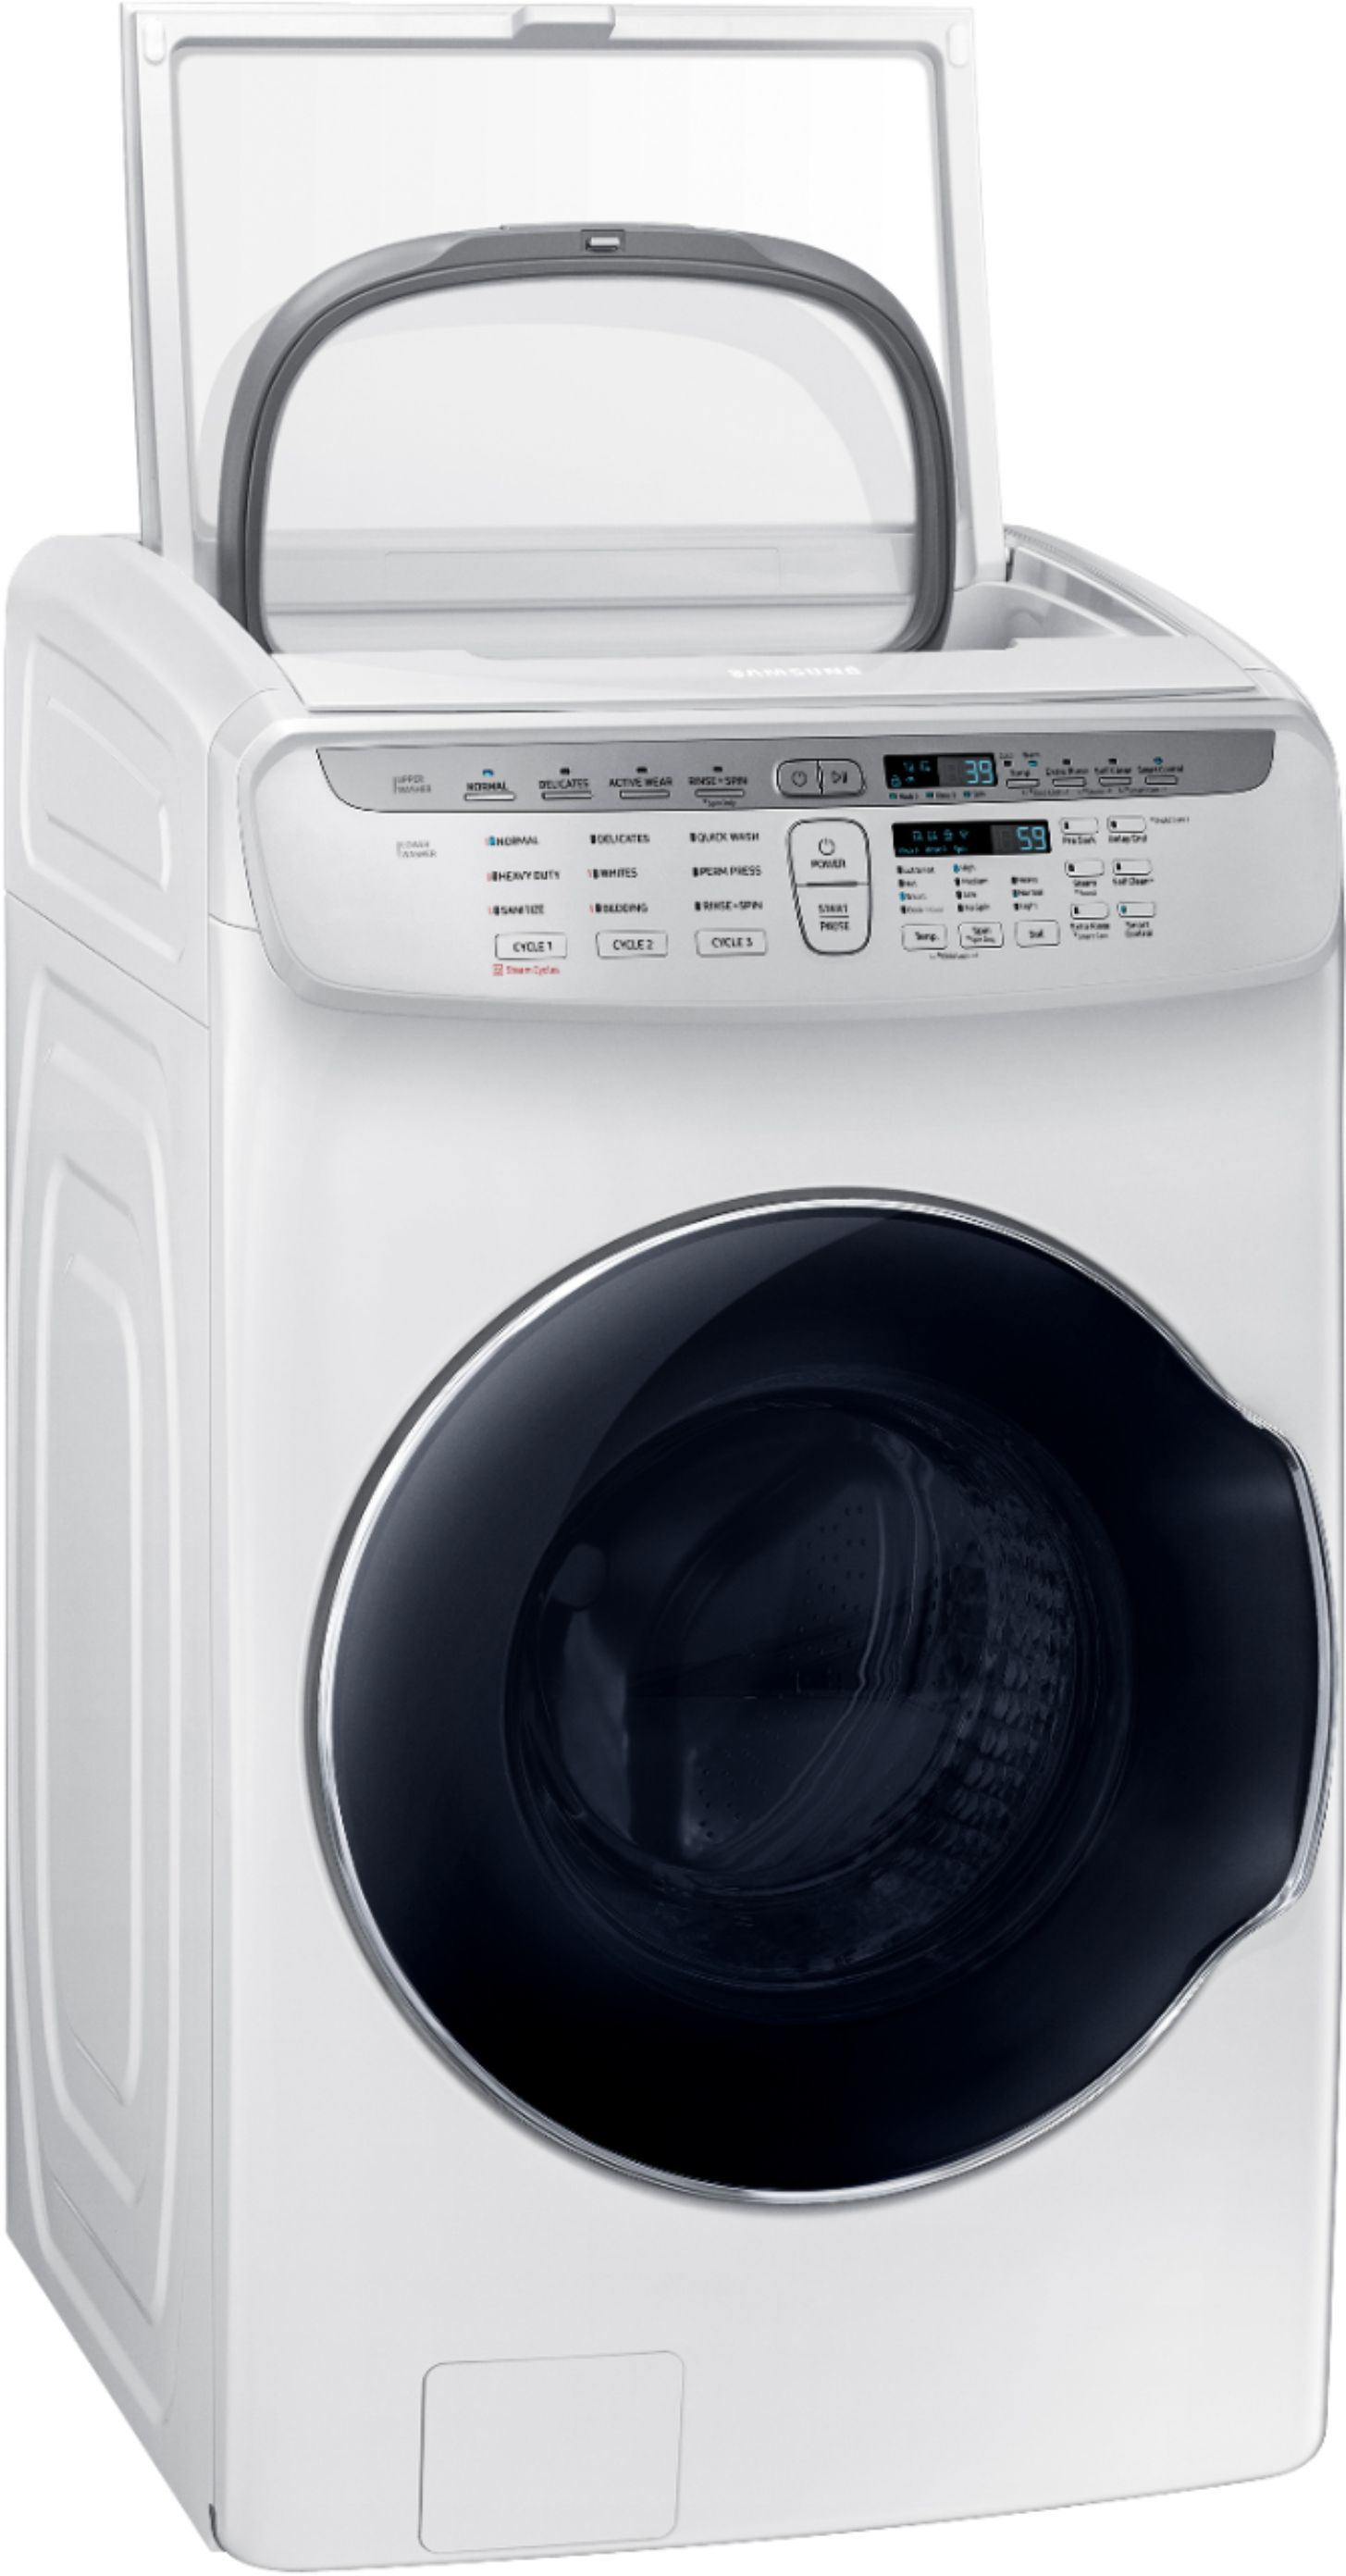 Angle View: Samsung - 5.5 Cu. Ft. High Efficiency Front Load Washer with Steam and FlexWash - White